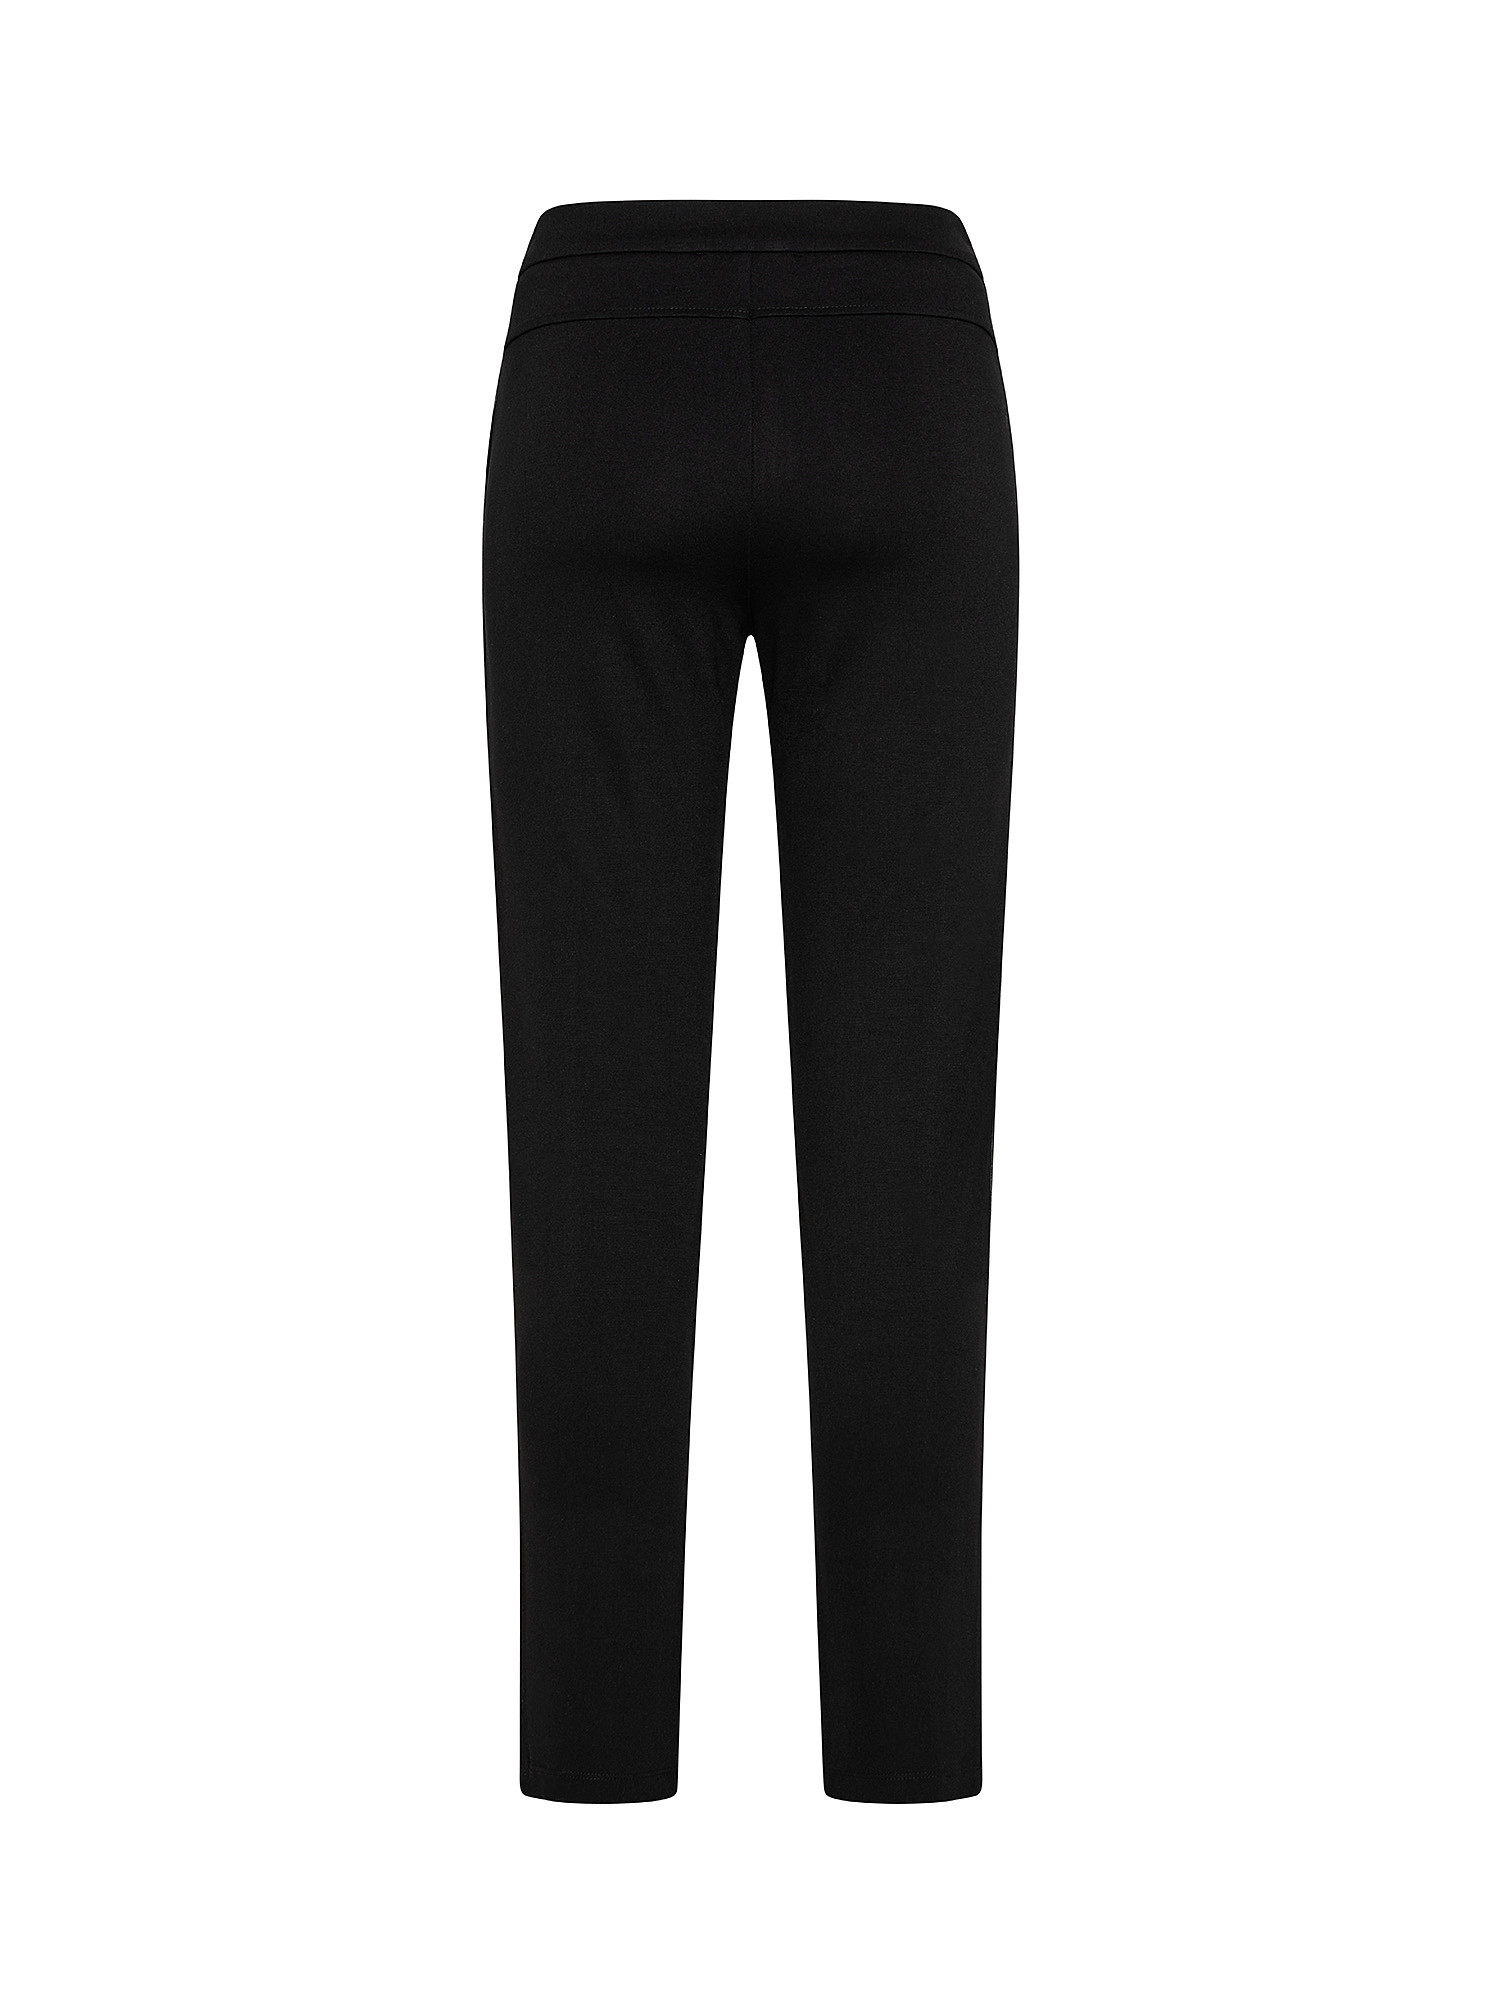 Tapered leg trousers, Black, large image number 1